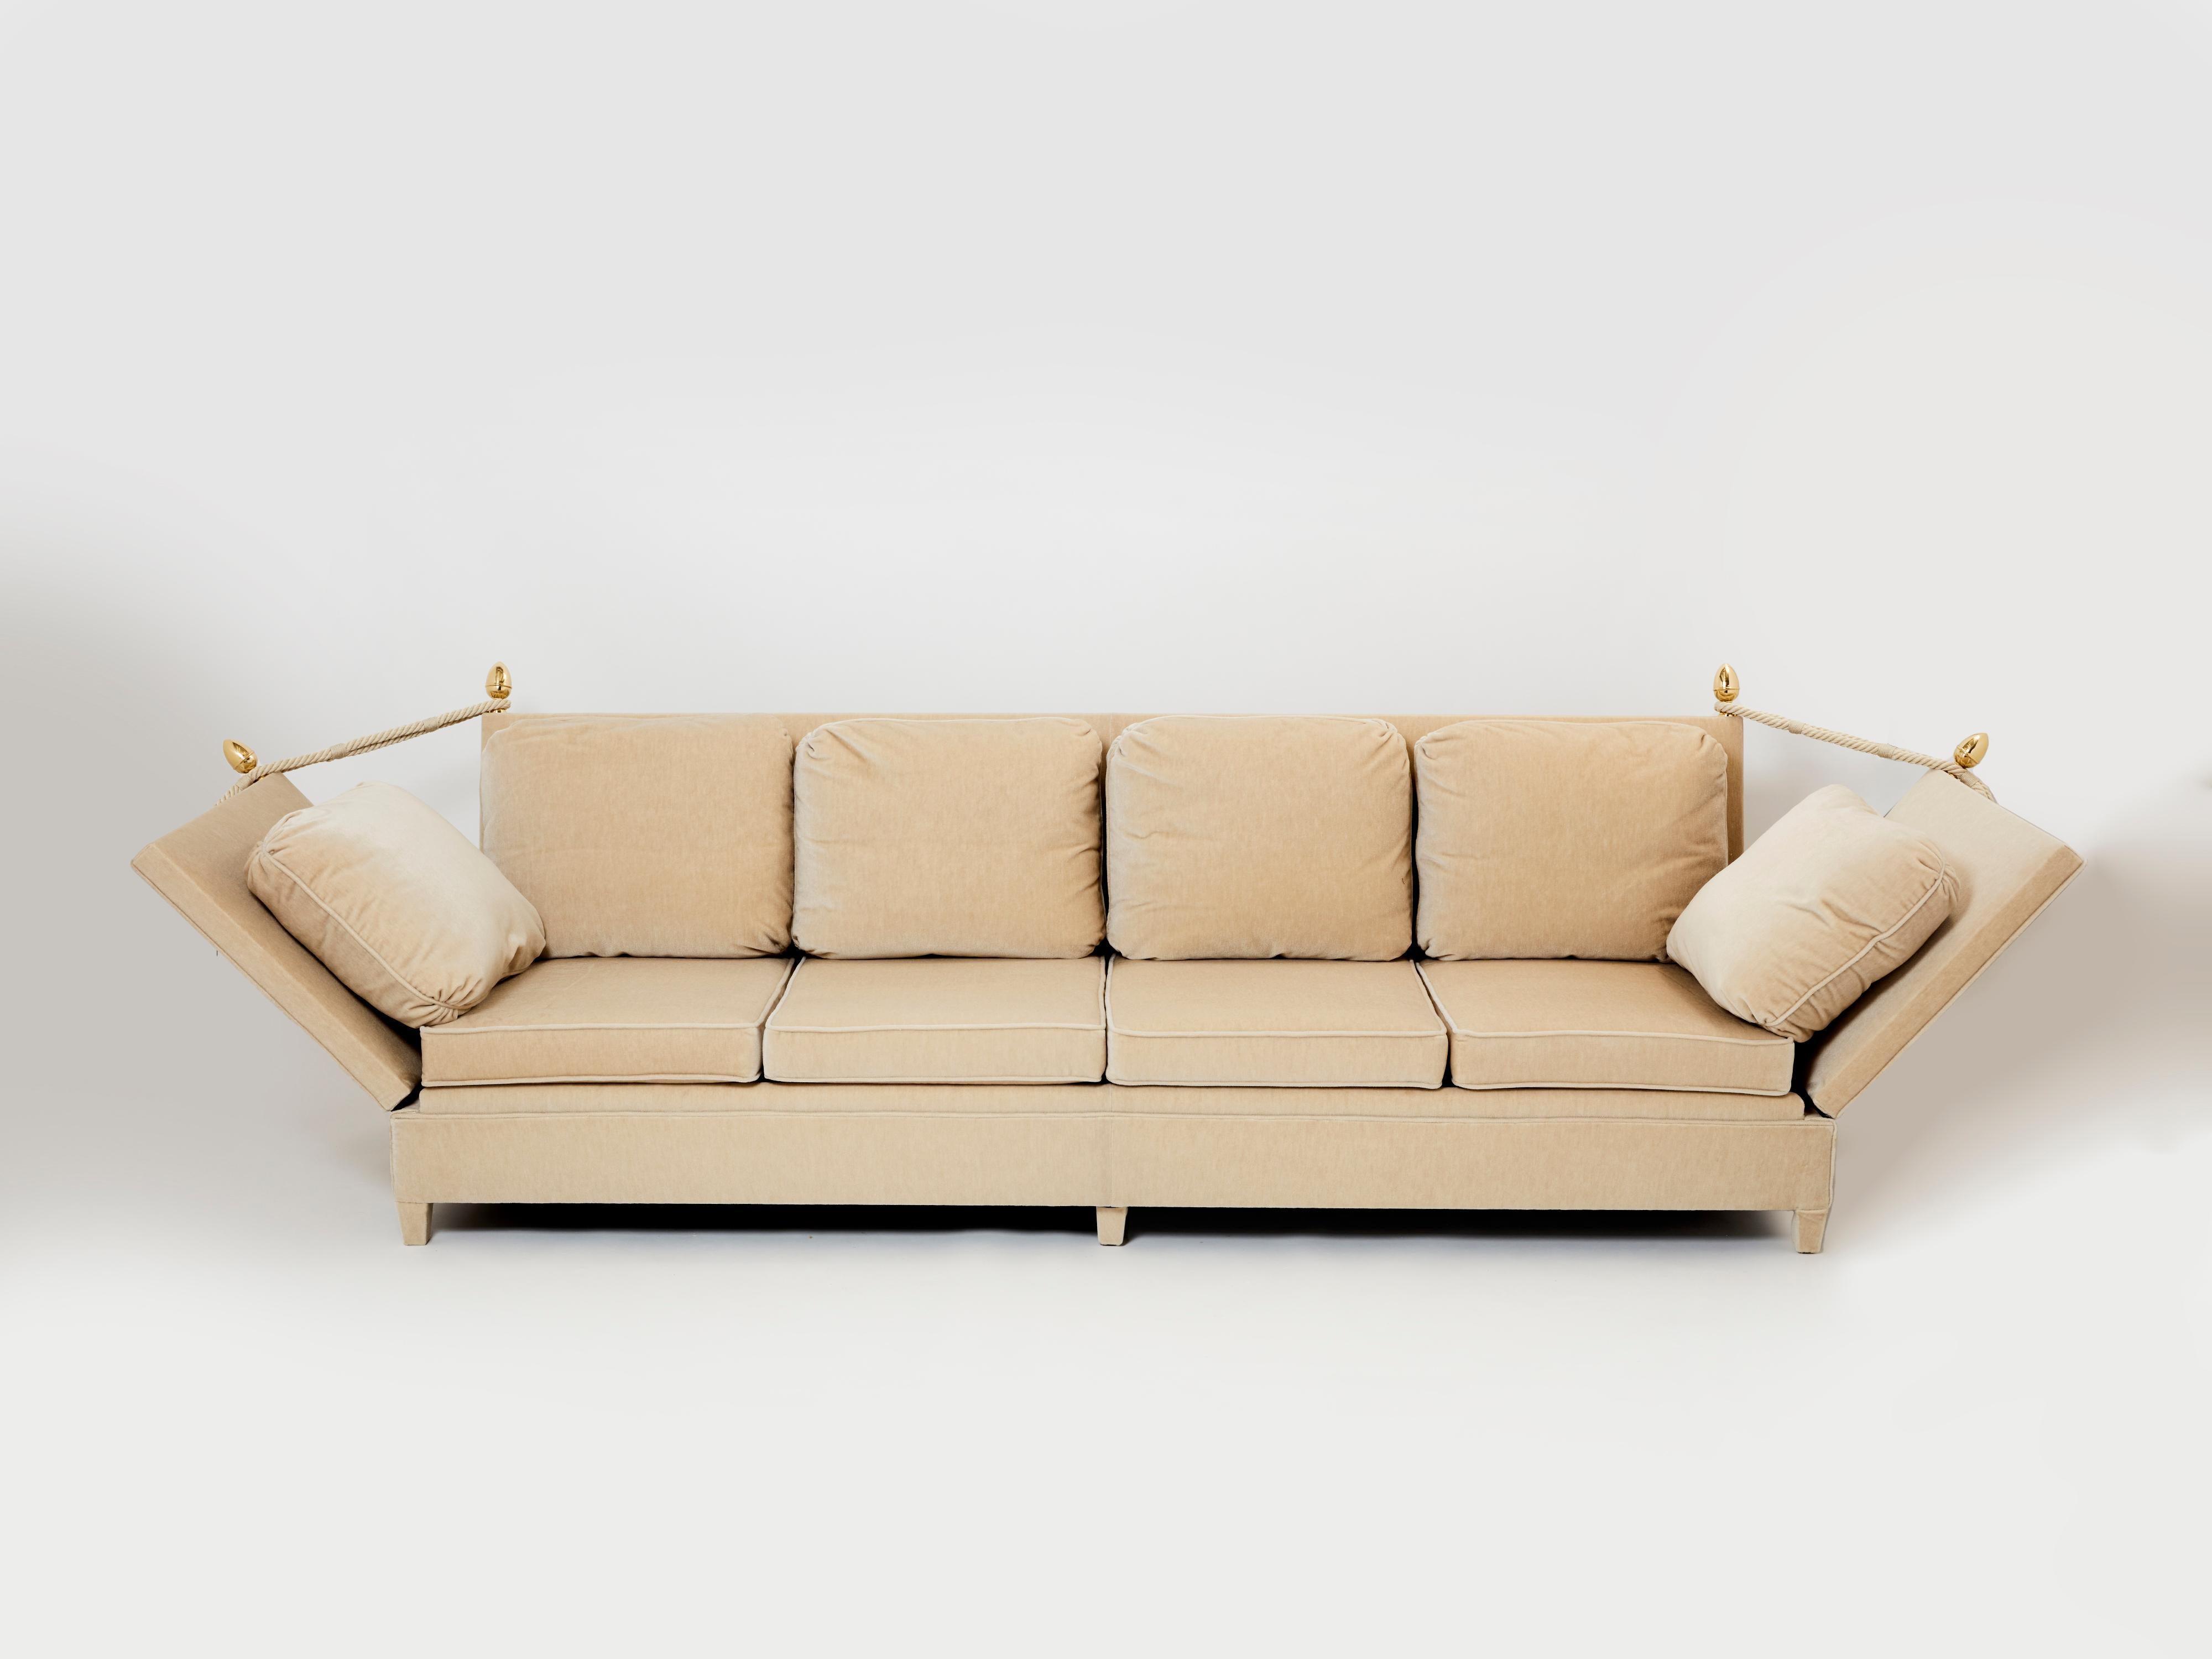 Newly reupholstered in mohair velvet in a soothing sand colour, this sofa is a beautiful example of Maison Jansen neoclassicism from the 1960s and 1970s. With inventive, extendable armrests inspired from XIXth century English officers' sofas, with